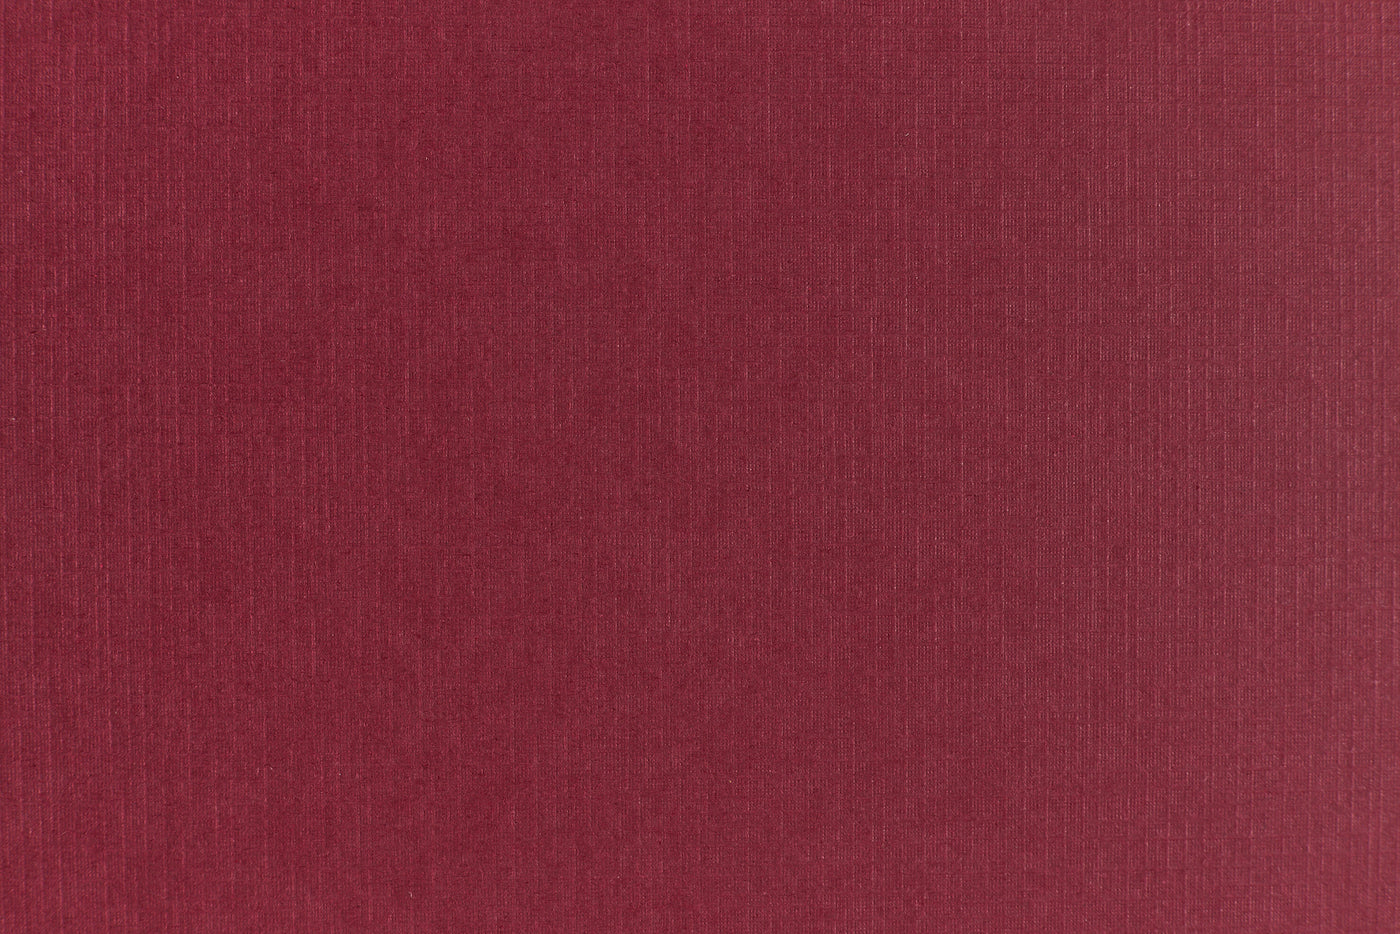 Monarch Red Cardstock, Linen Pattern (Royaltone, Cover Weight)